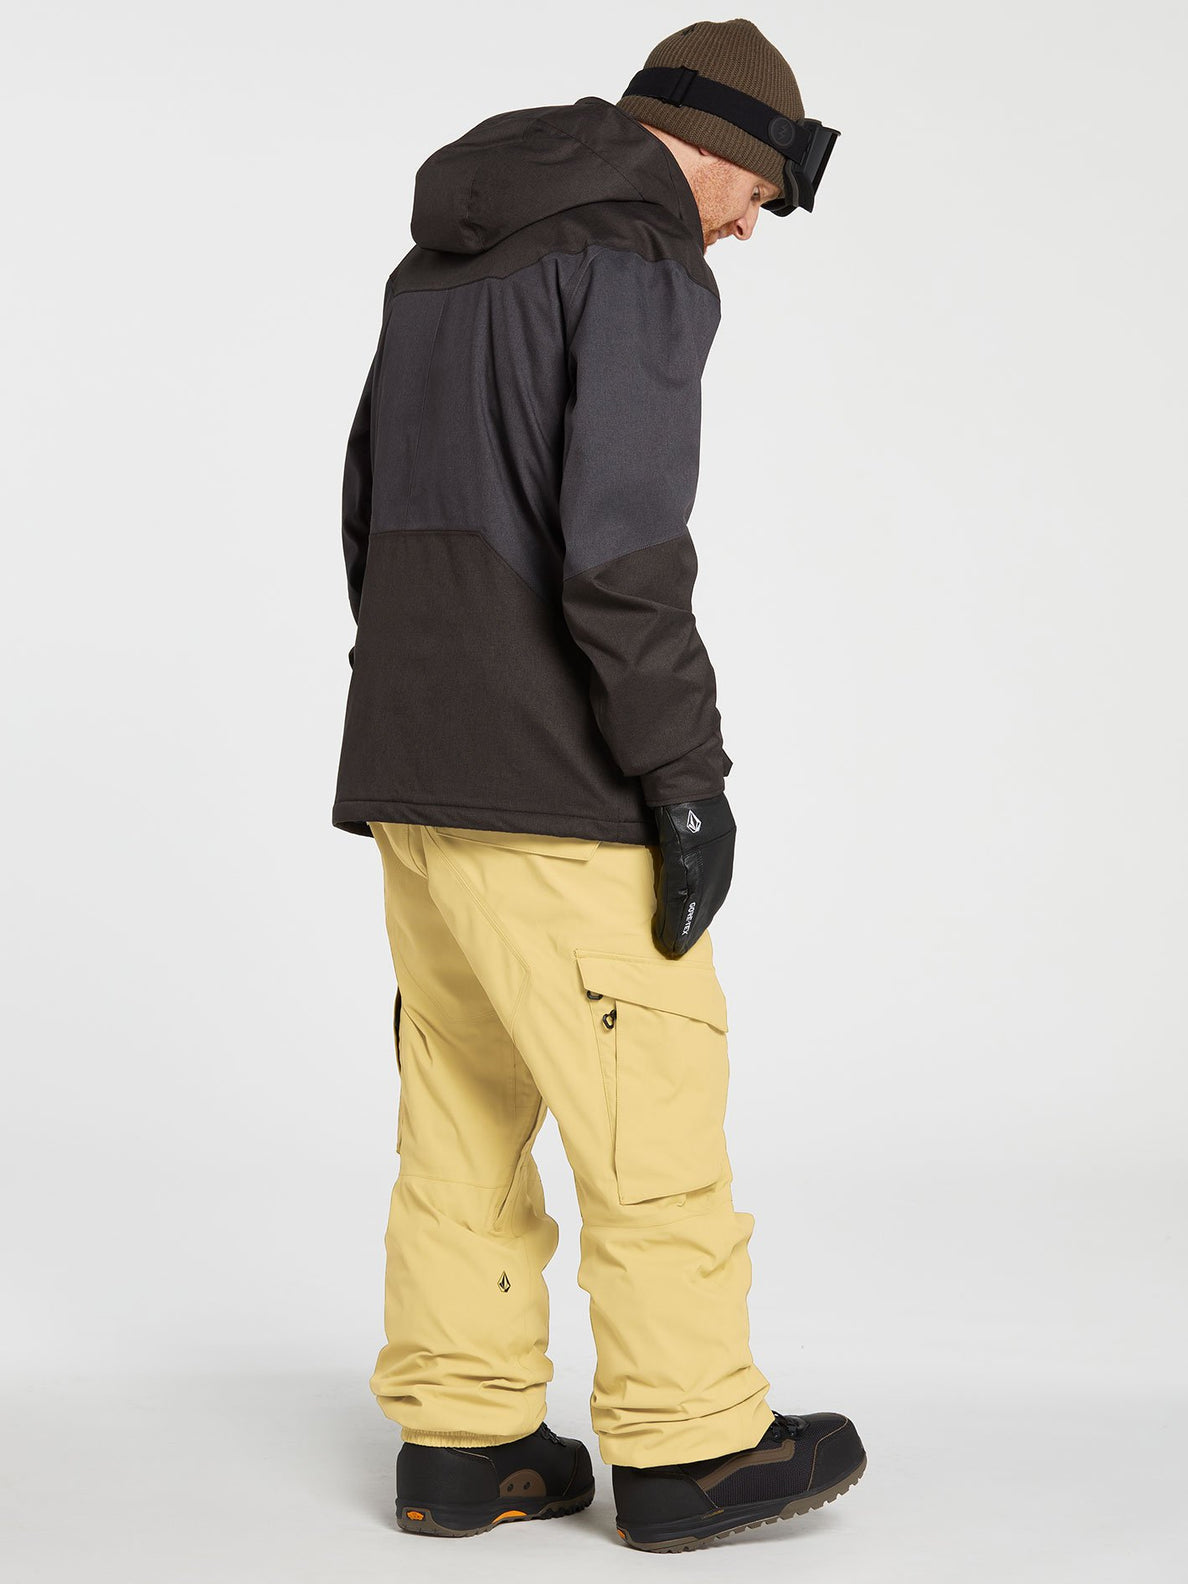 Stone Gore-Tex Trousers - GOLD (G1352206_GLD) [5]